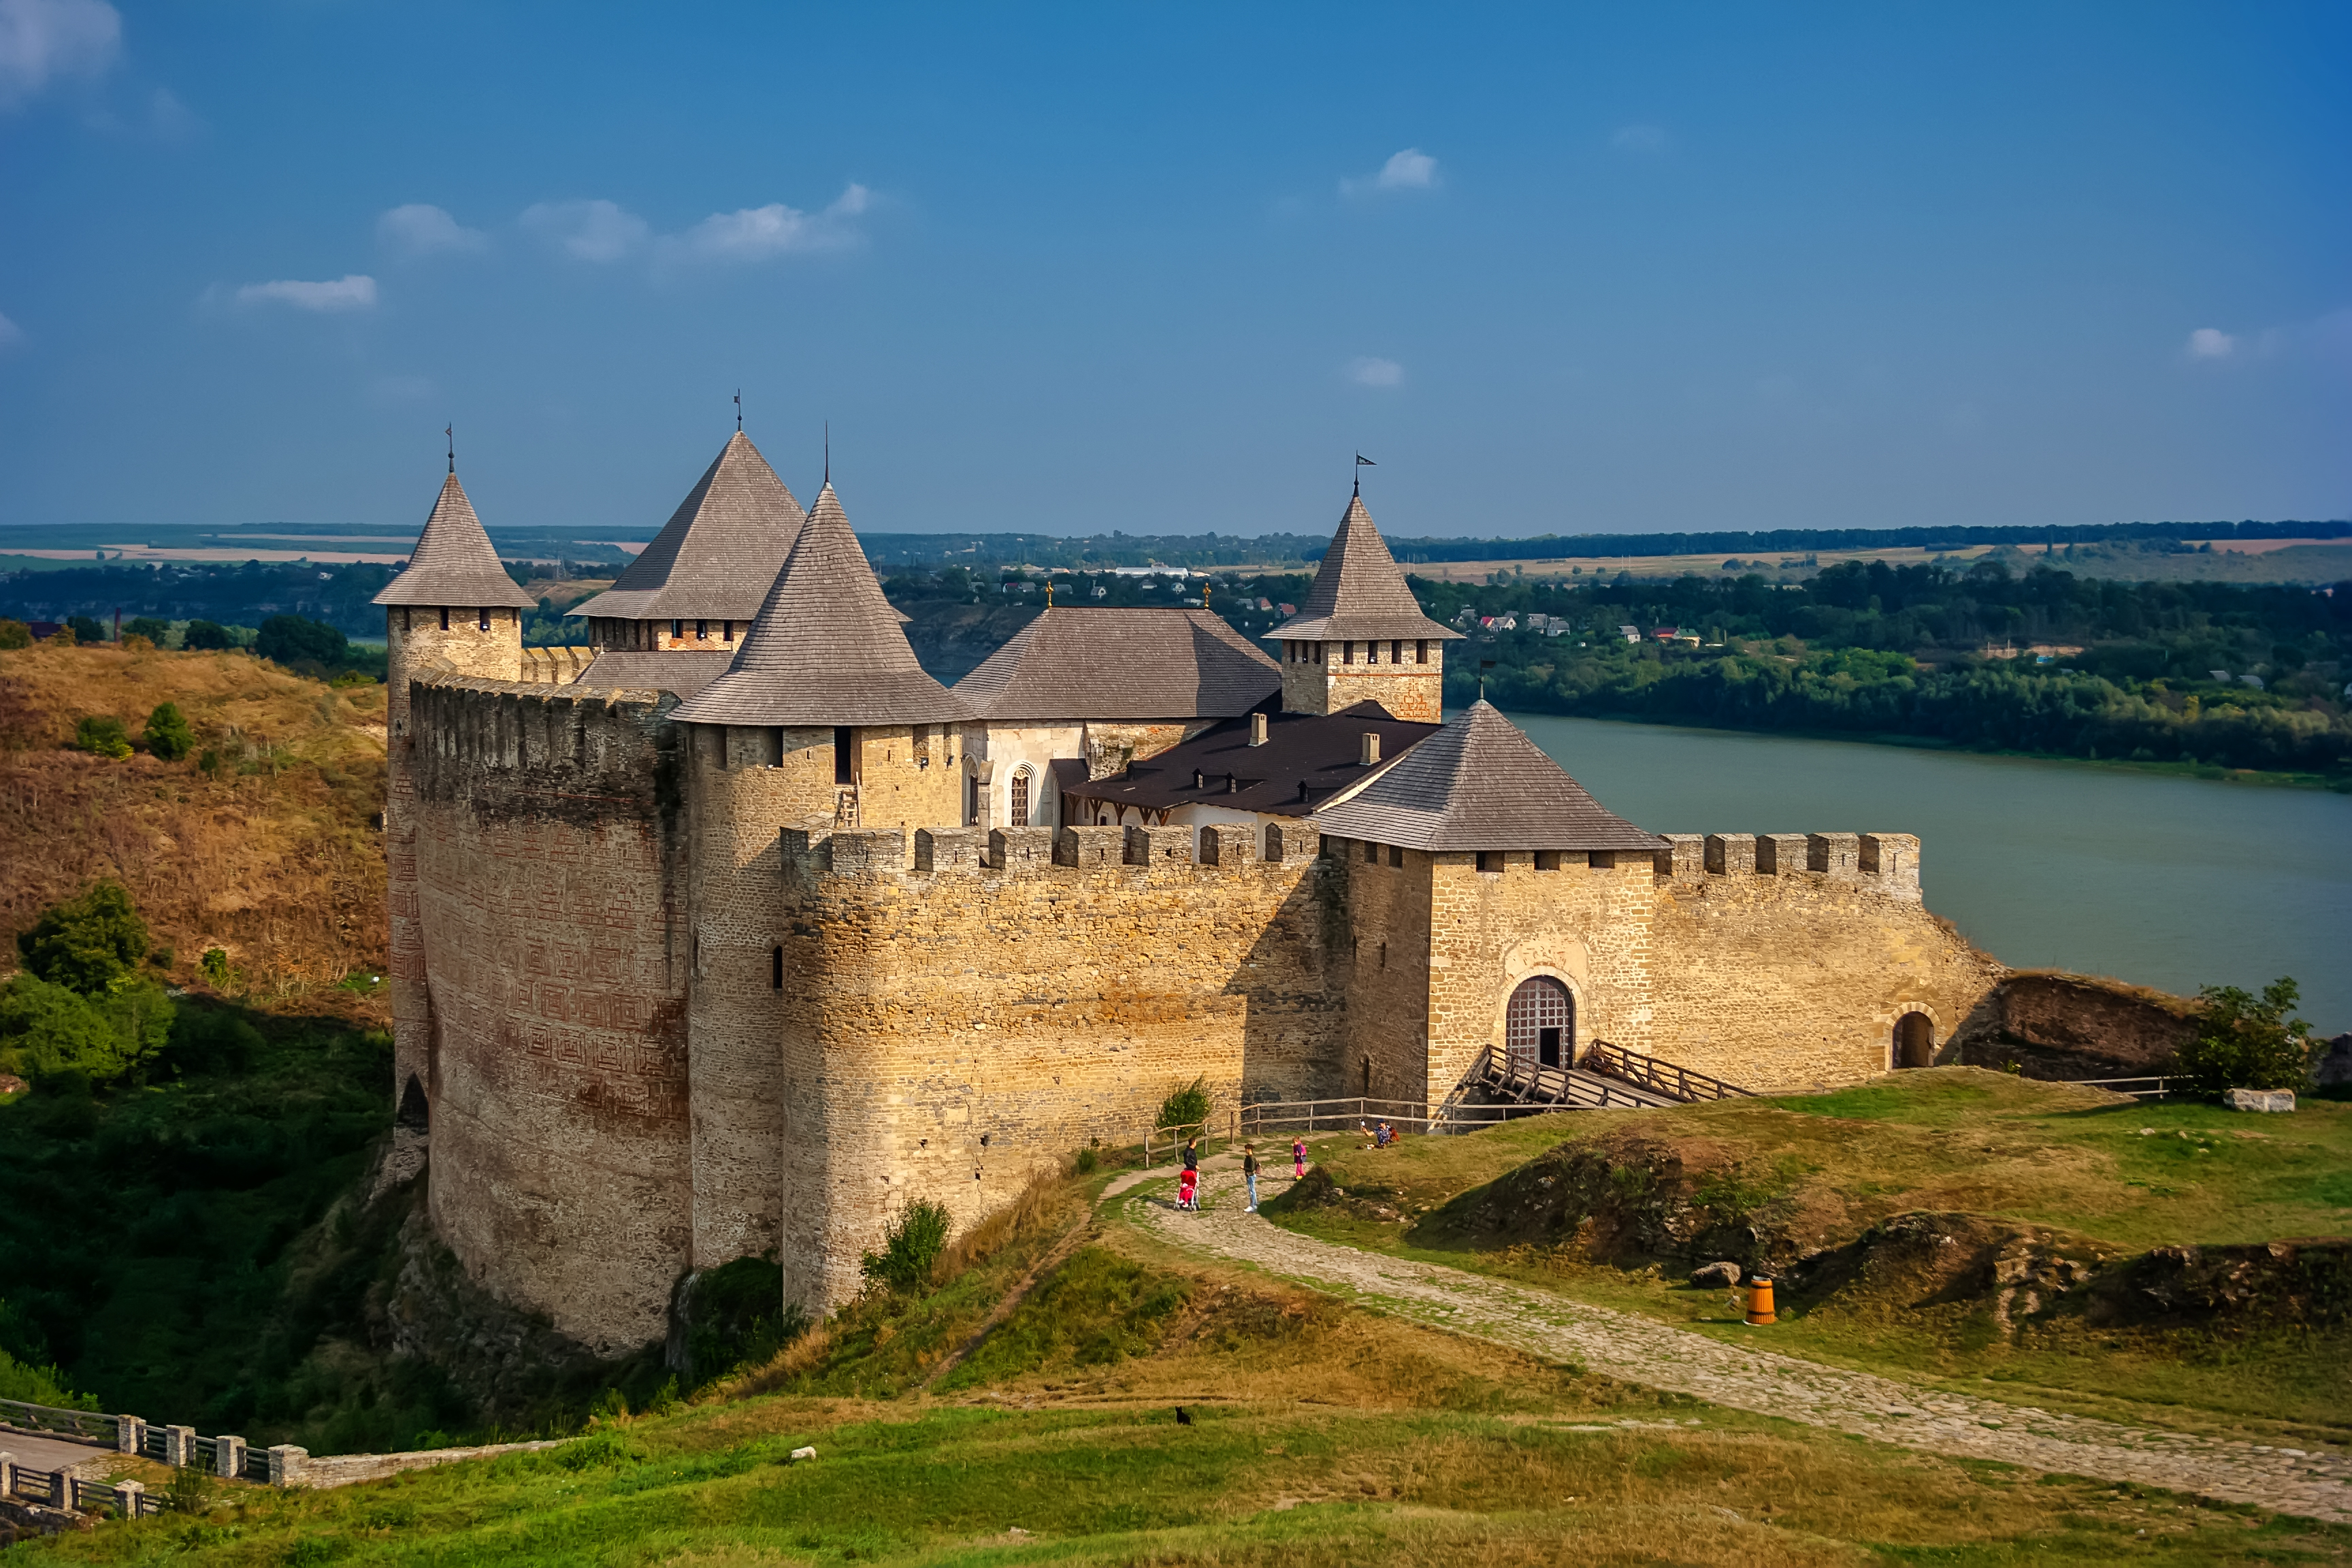 The Fortress: The Siege of Przemyśl and the Making of Europe's